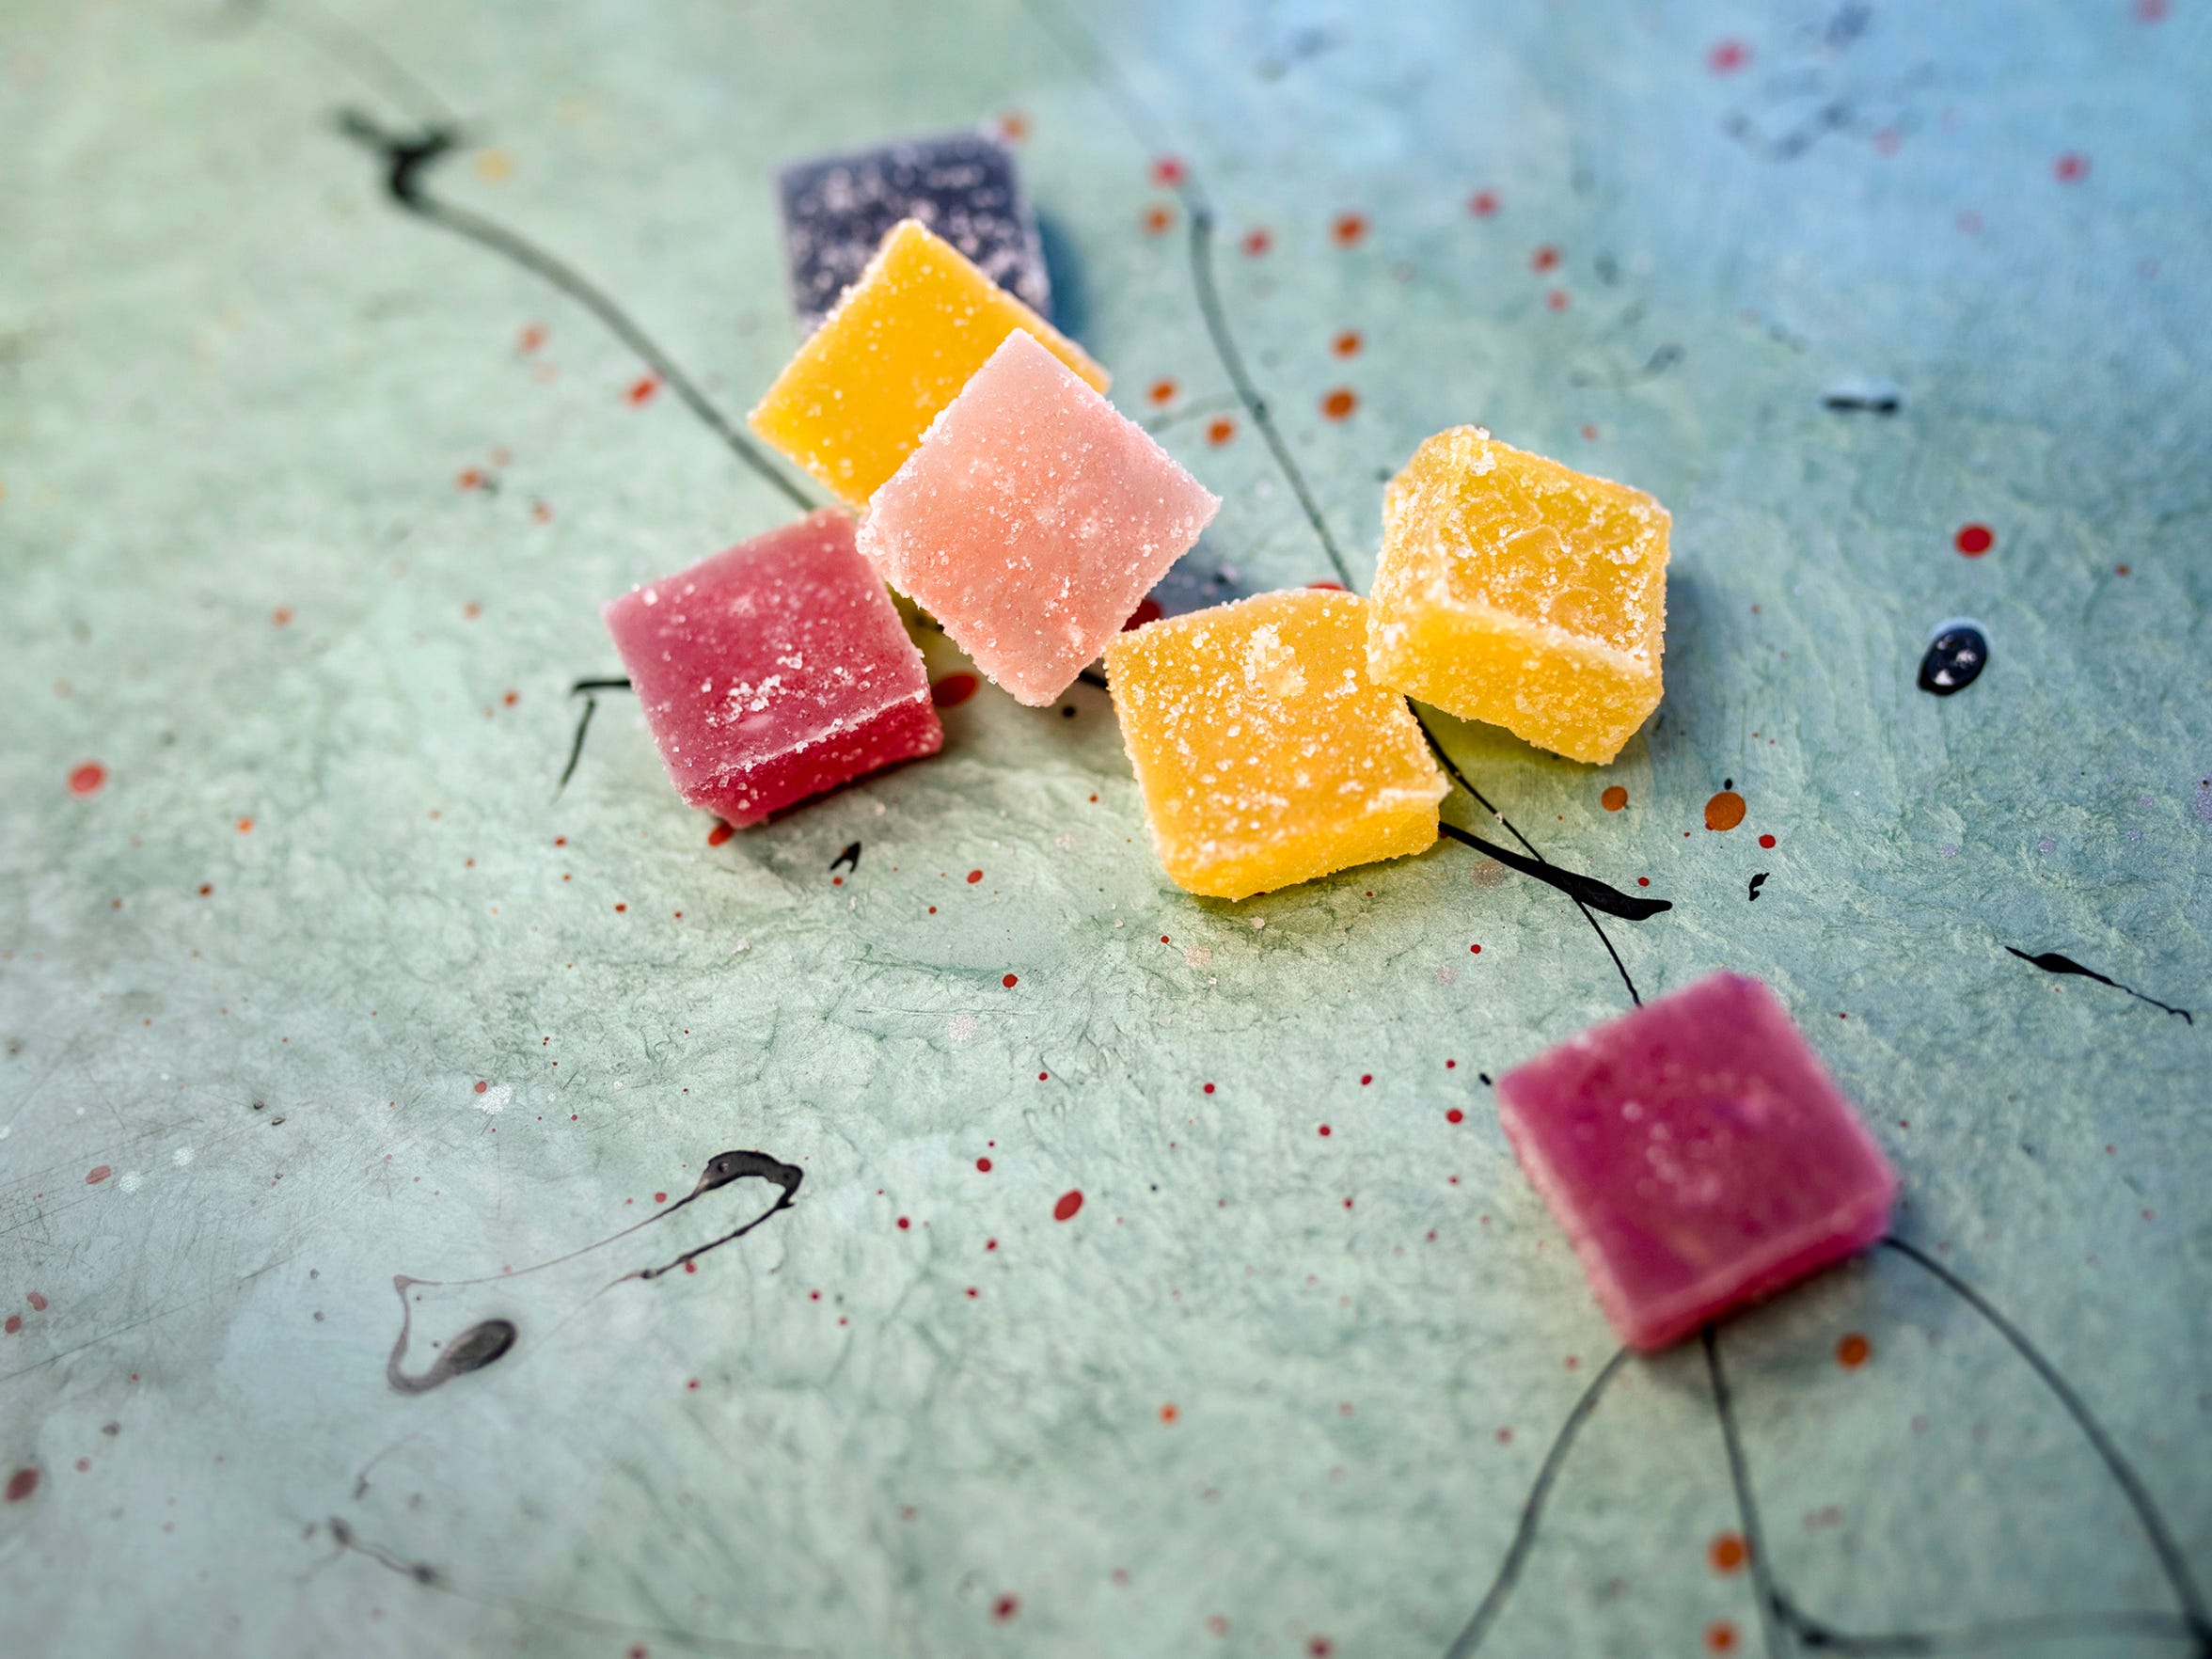 Wana brands Sour Gummies containing Indica THC come